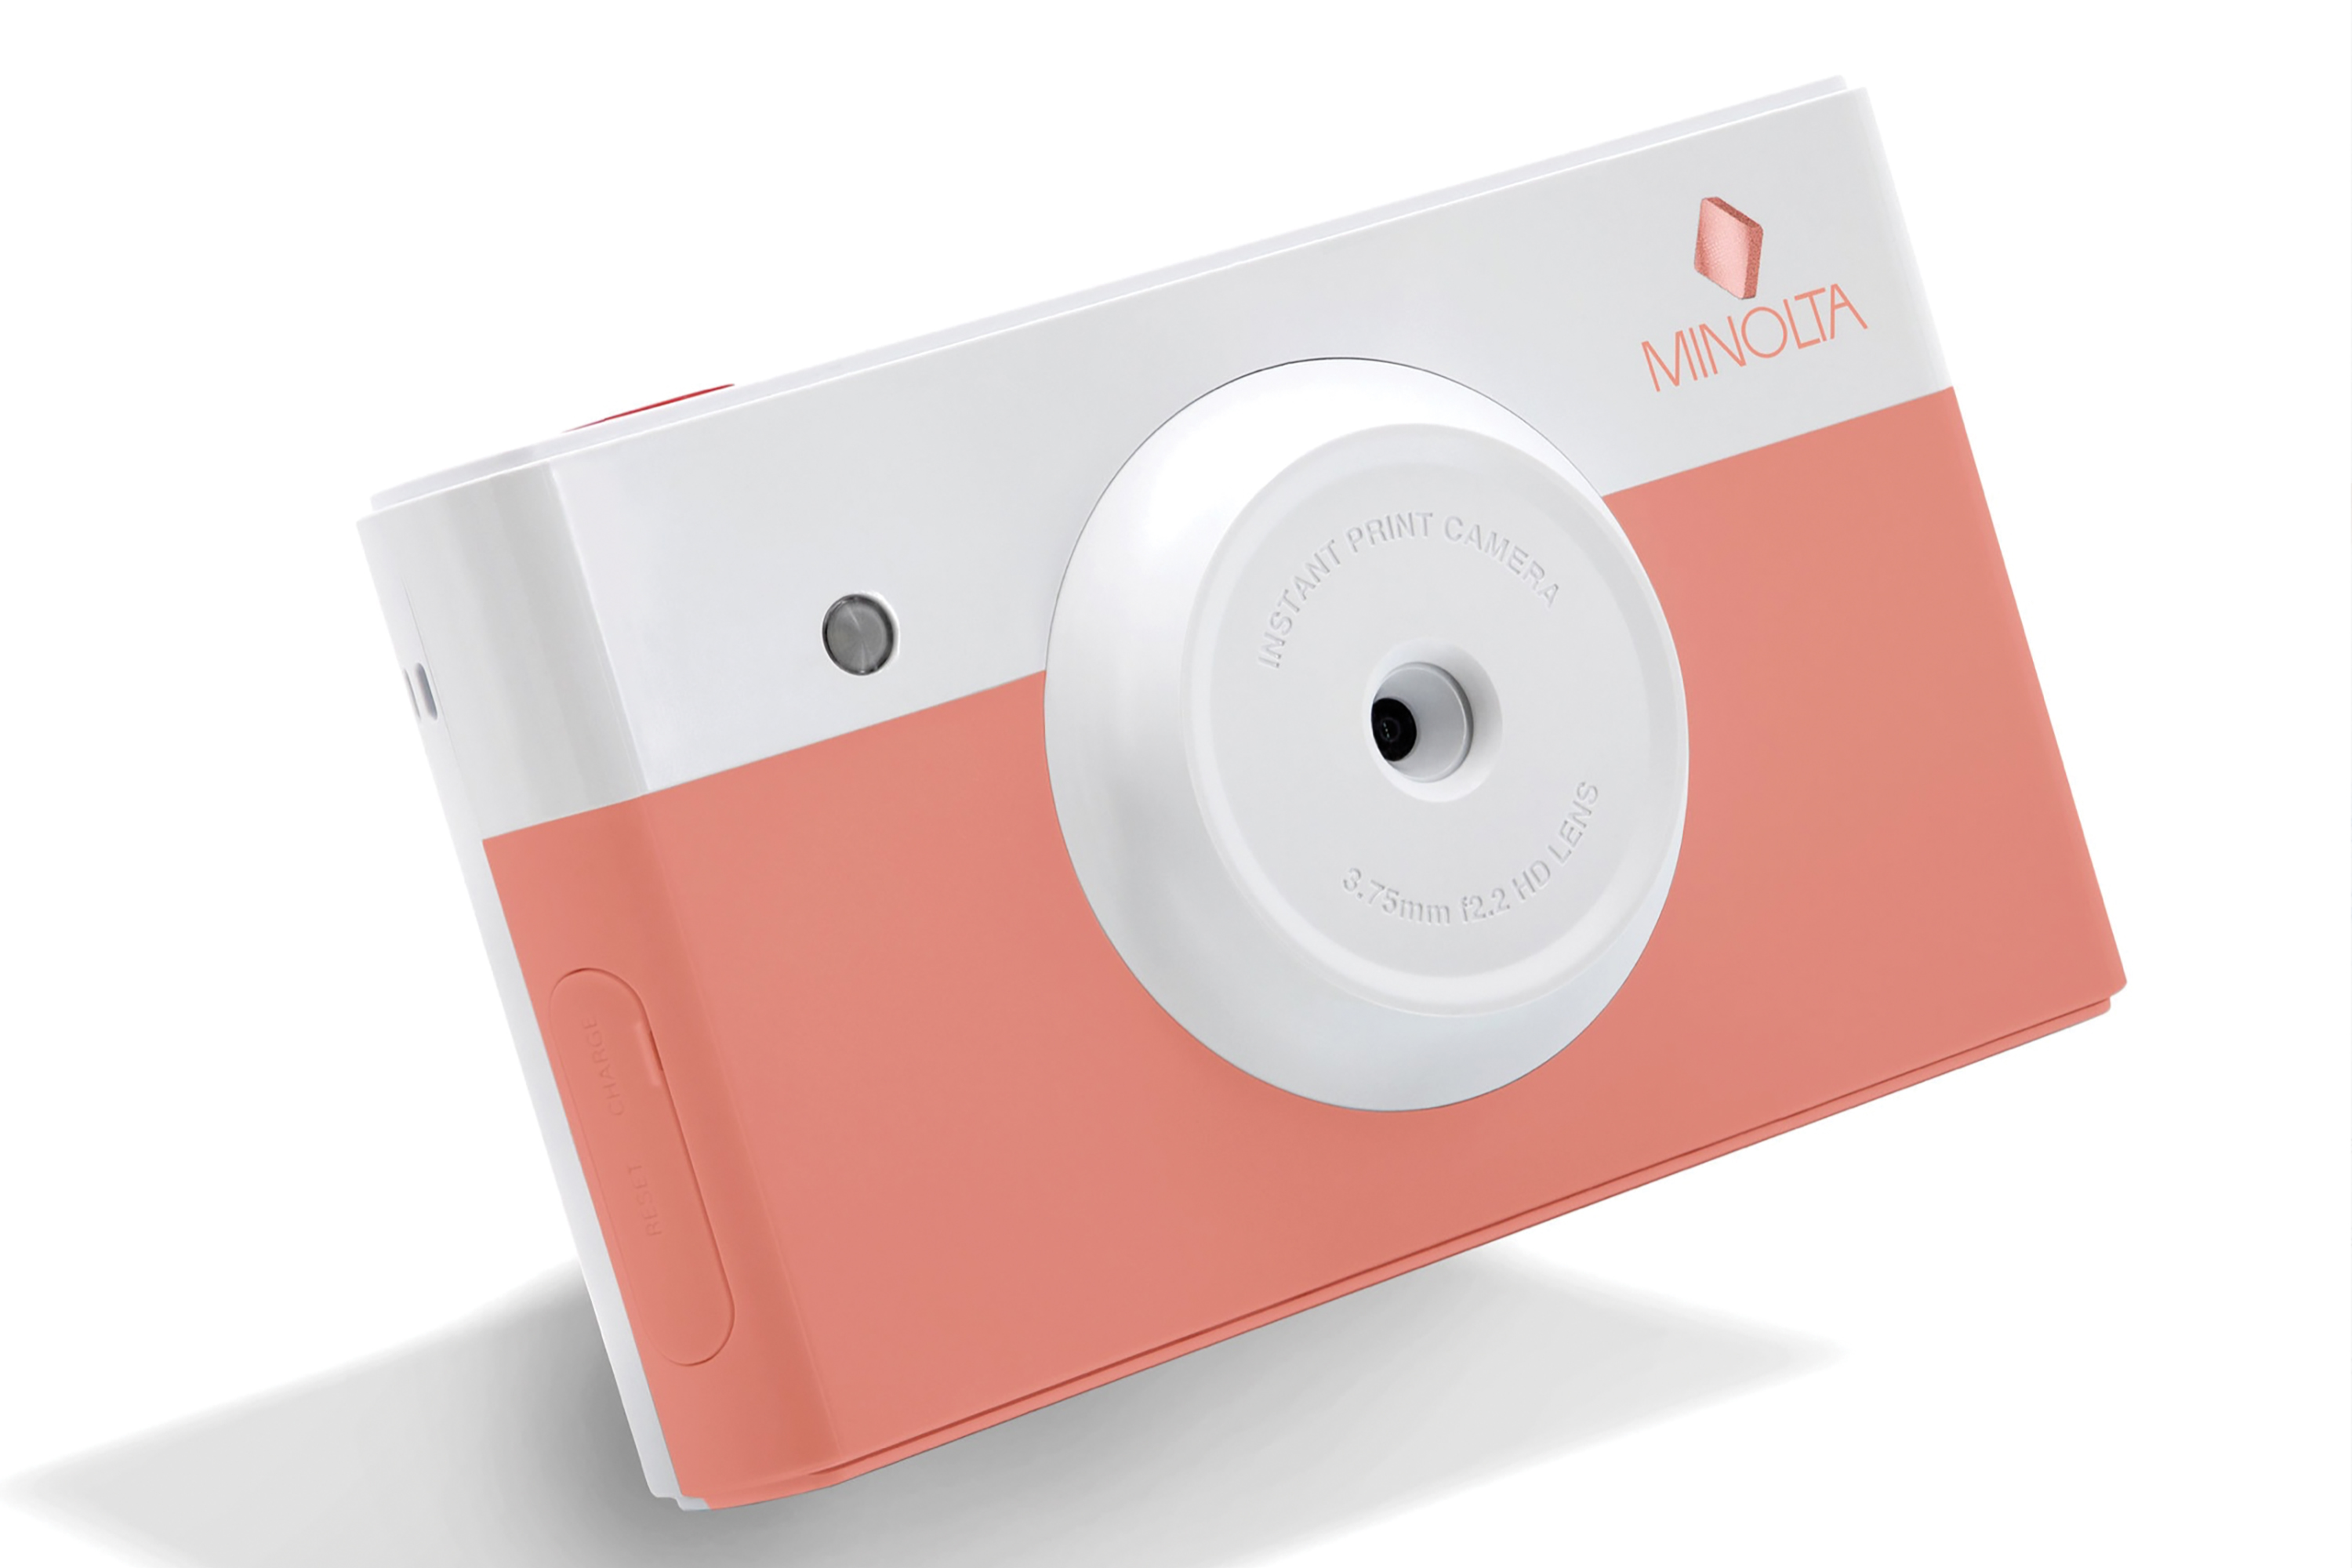 Minolta Made an Instant Camera. But Why Though?